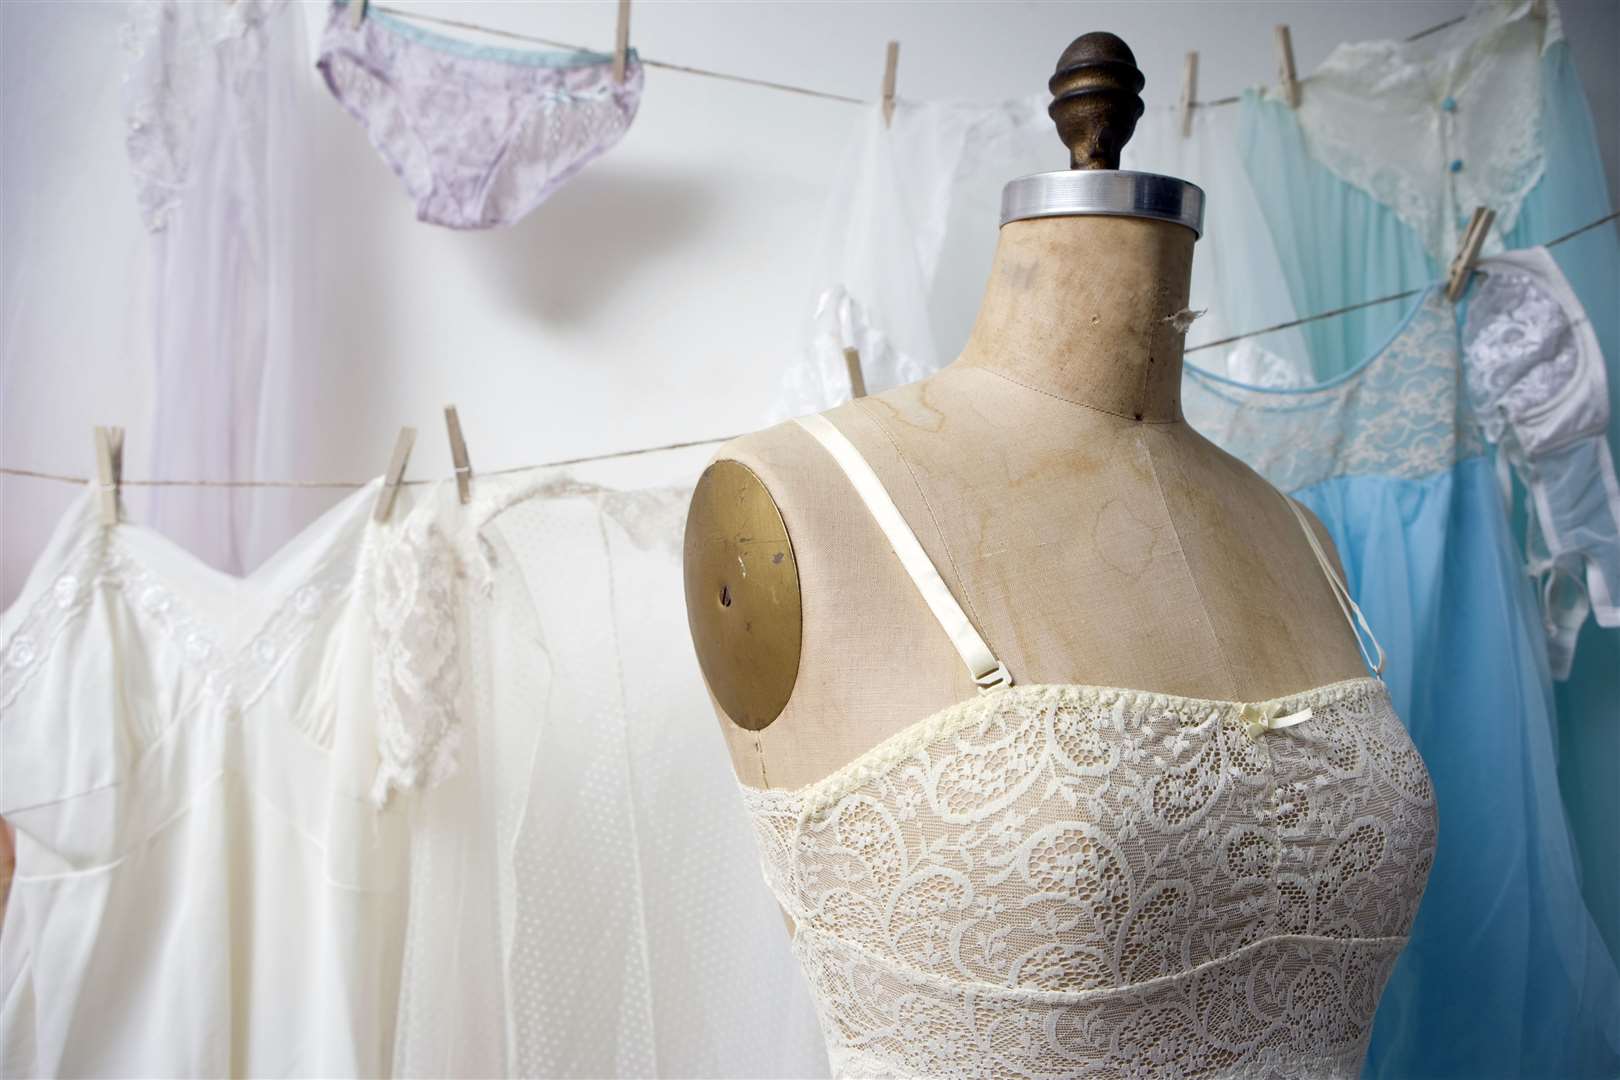 Lingerie will feature in the exhibition. Picture: iStock